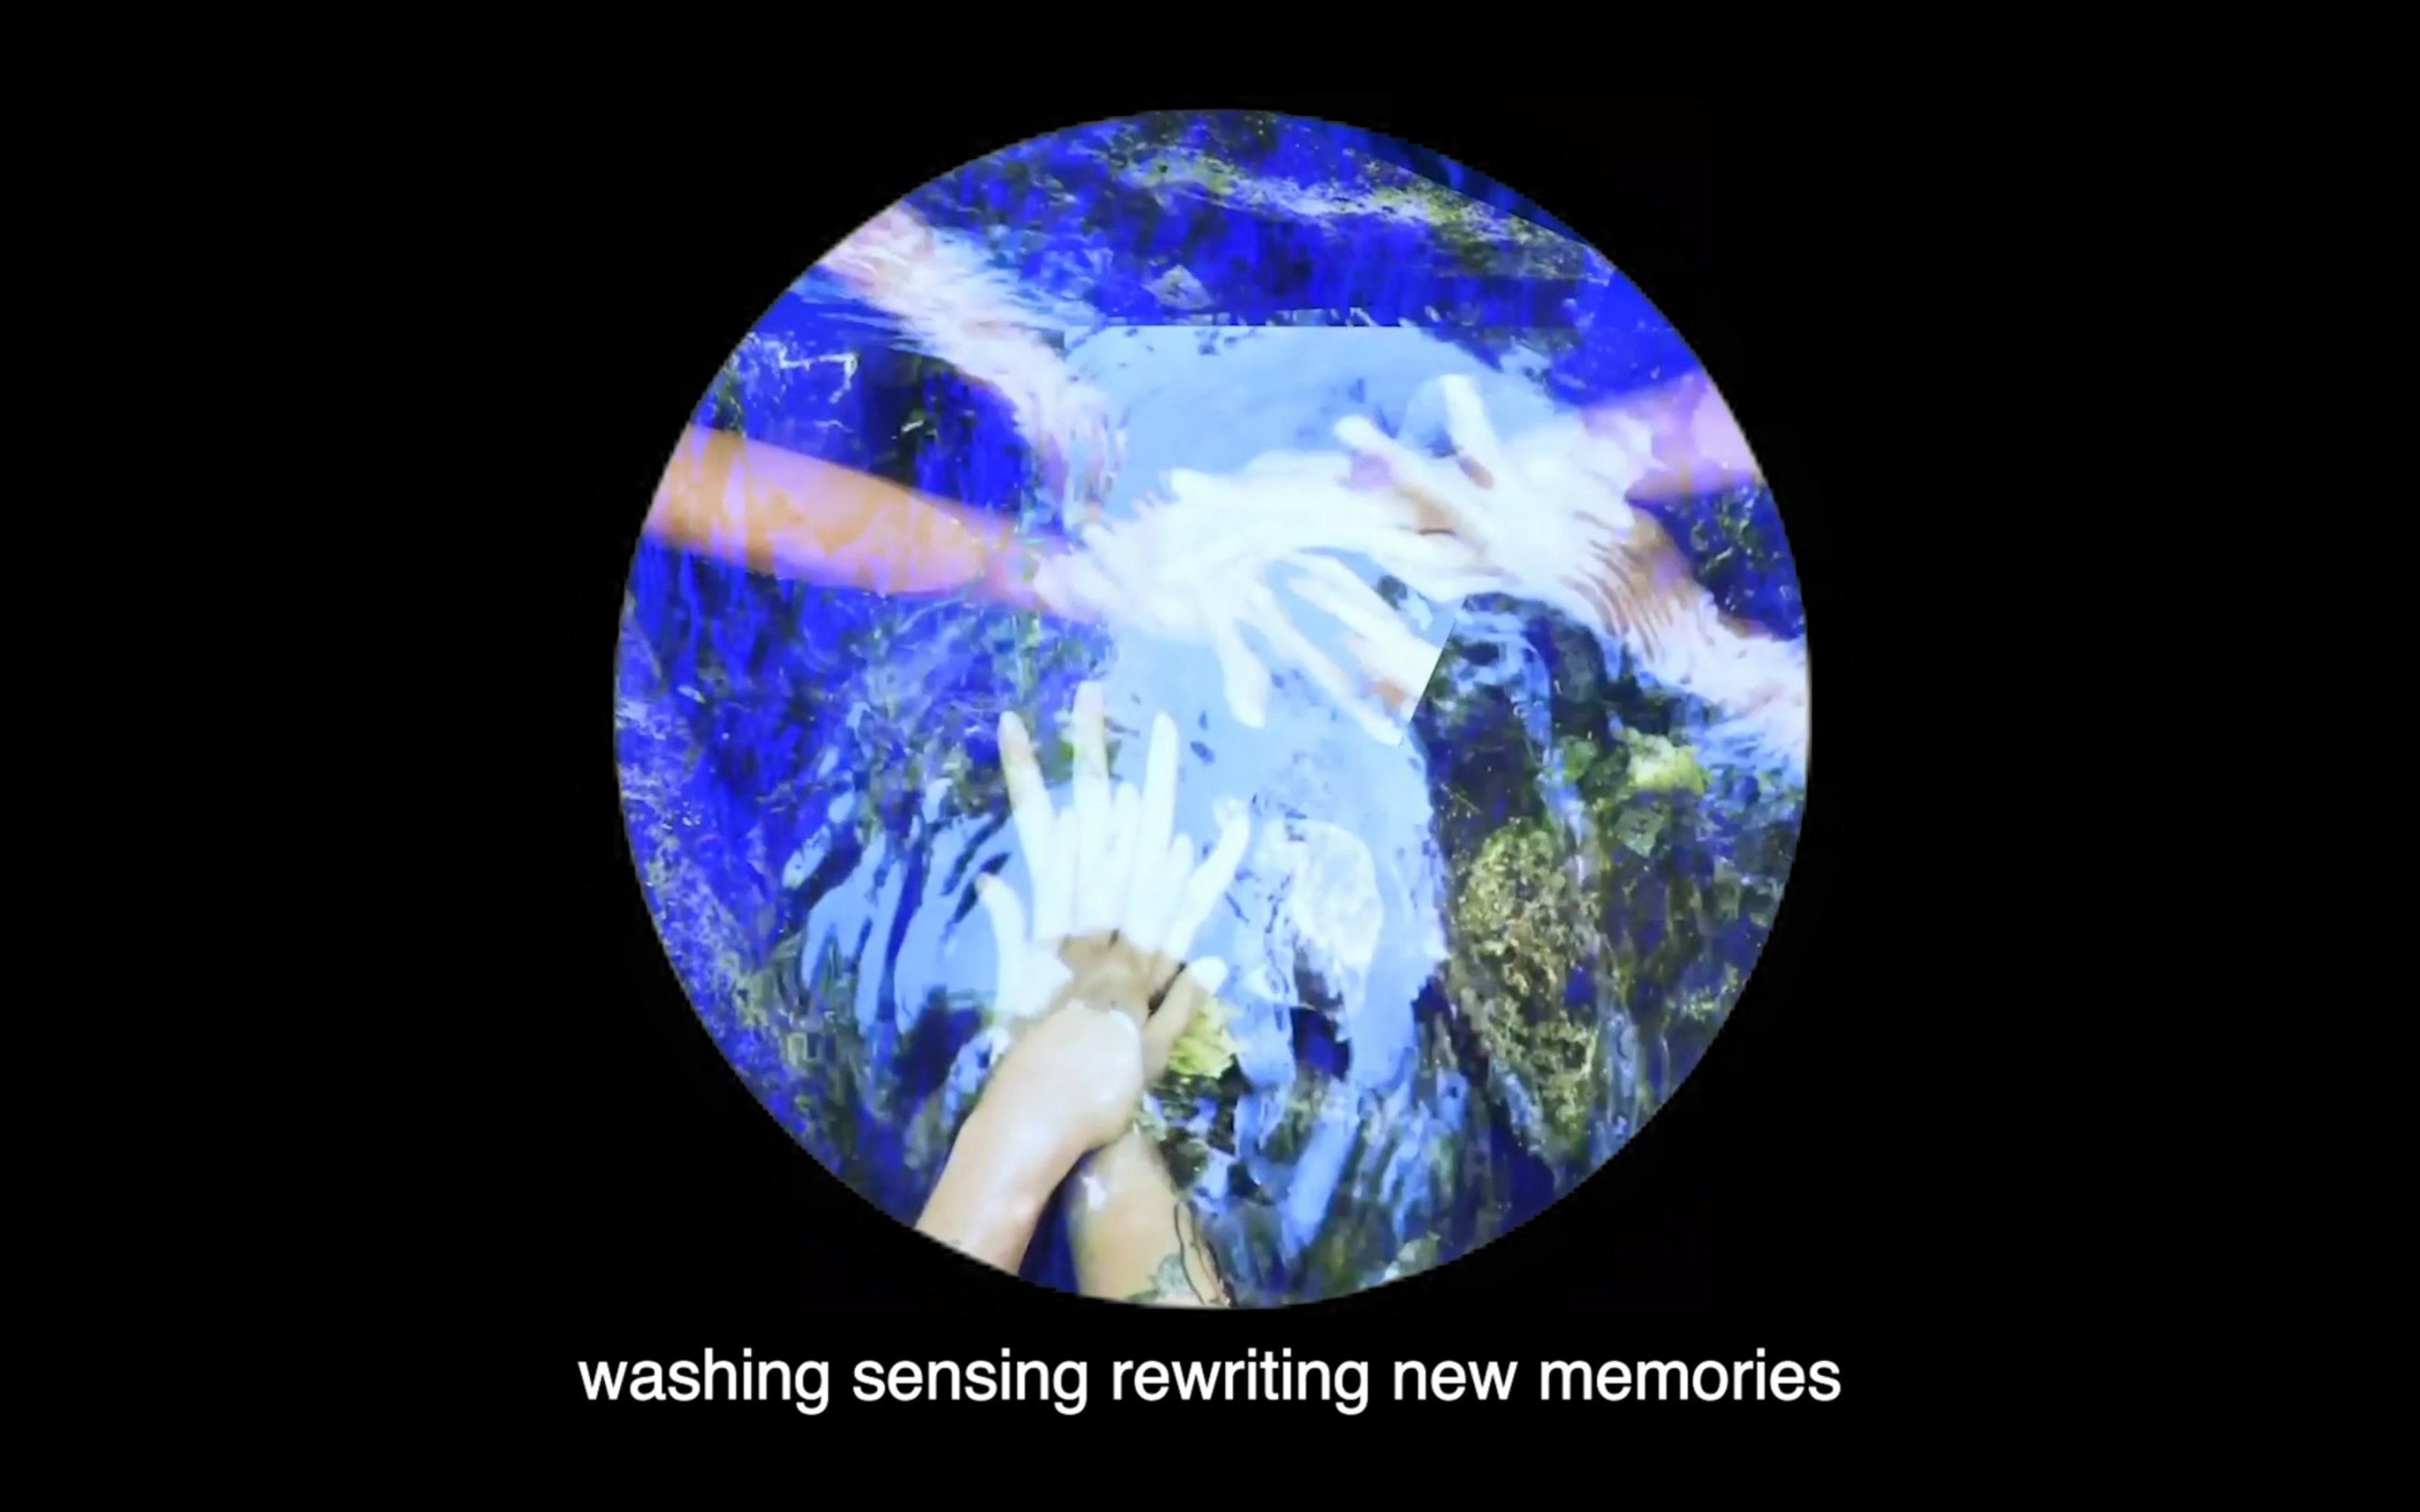 In a circle, three pairs of hands in water. Caption reads: "washing sensing rewriting new memories"